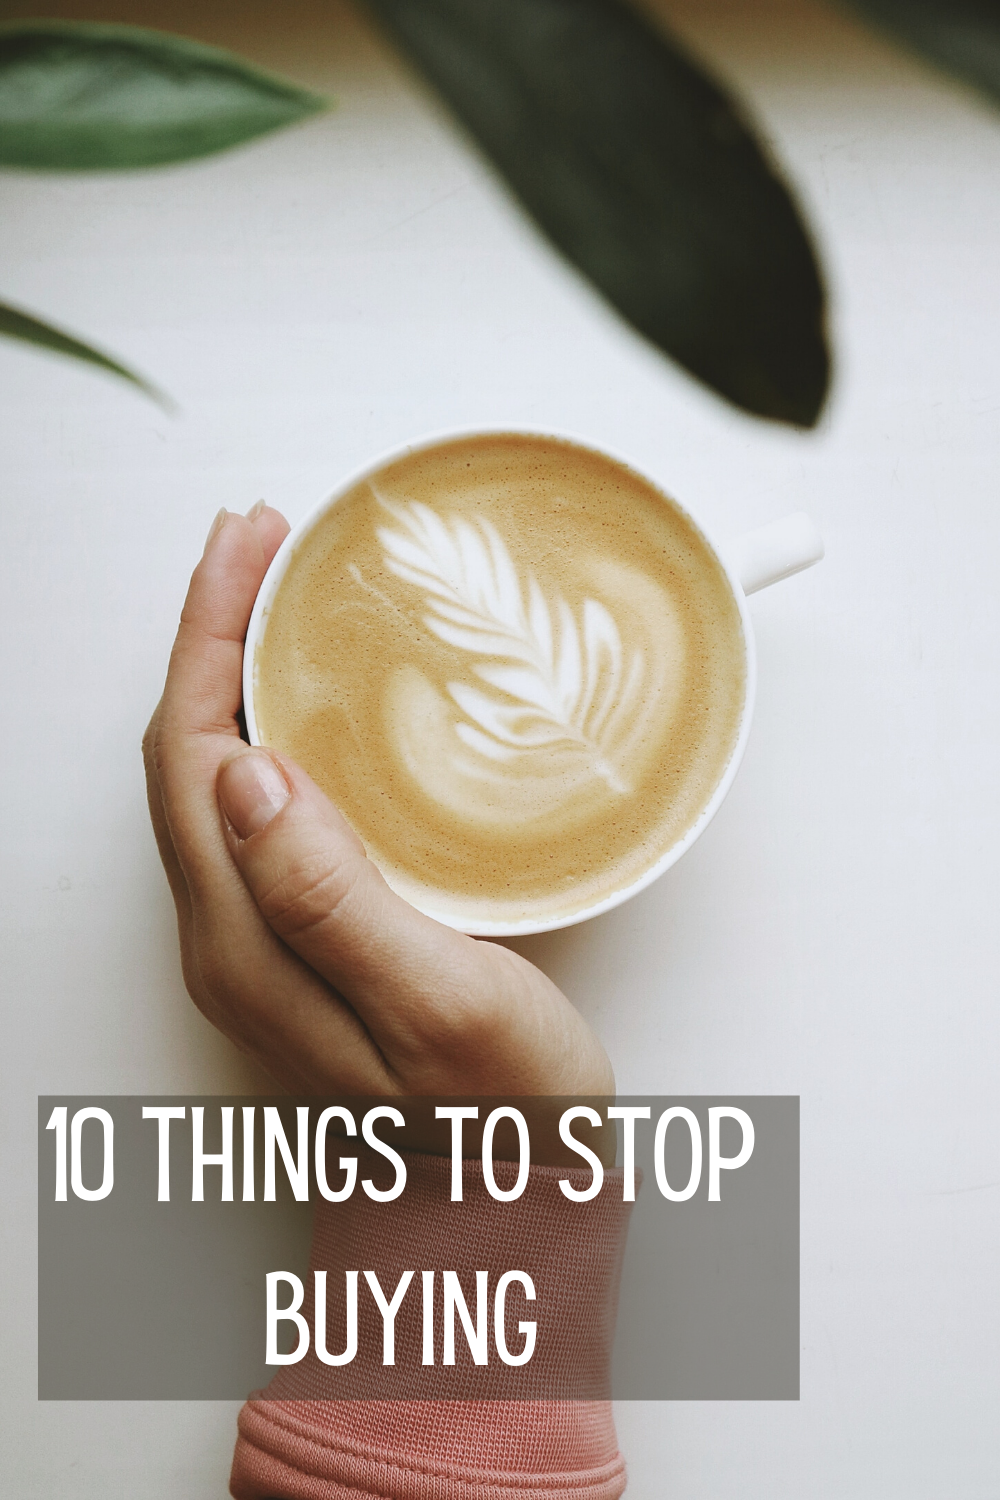 10 things to stop buying